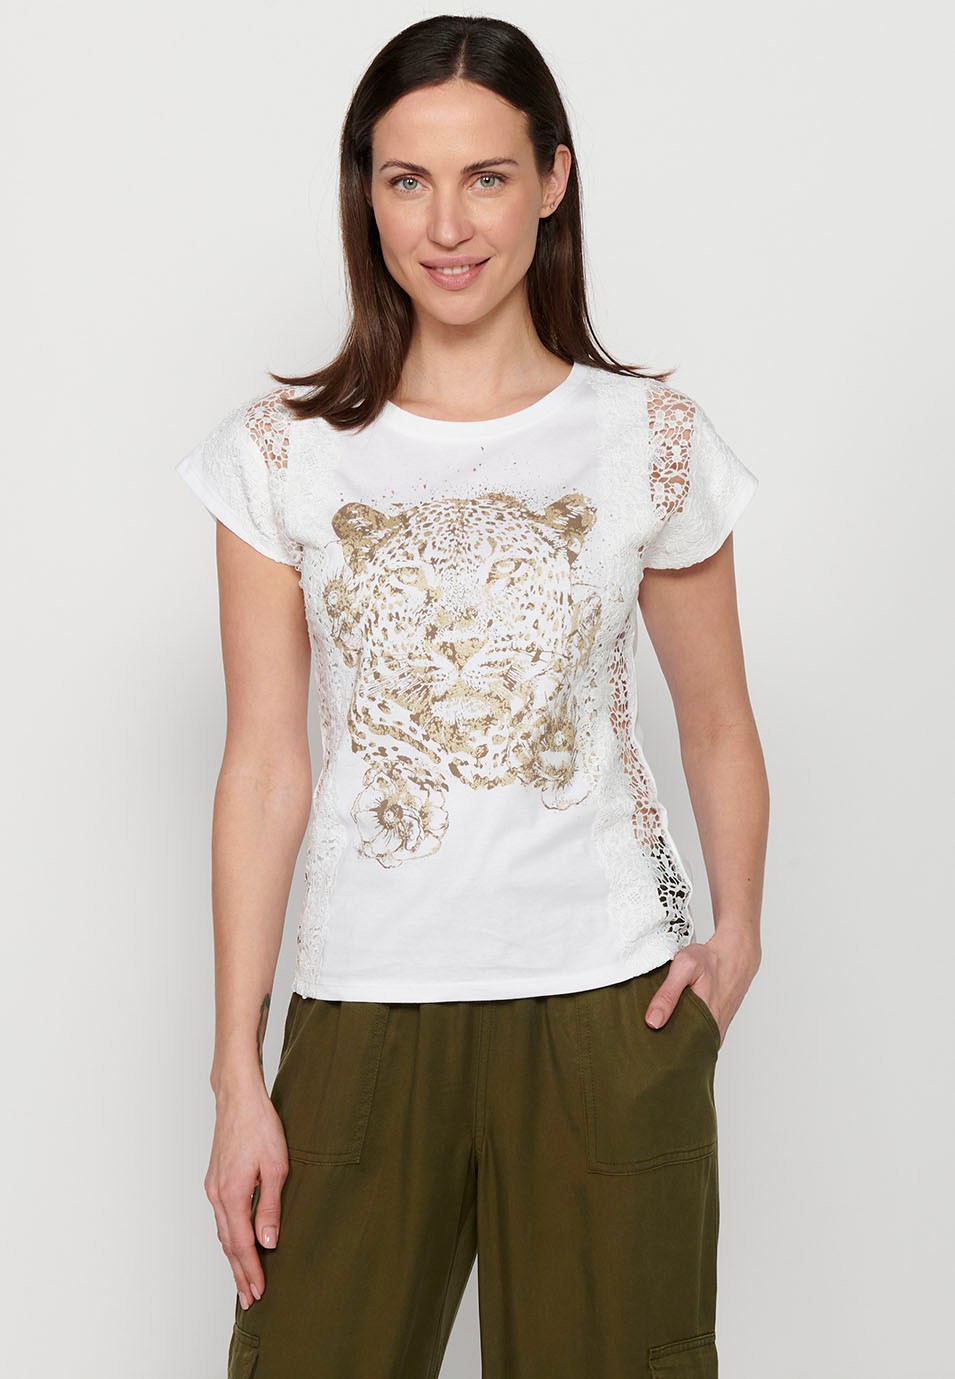 Short-sleeved T-shirt with lace detail and front print, white color for women